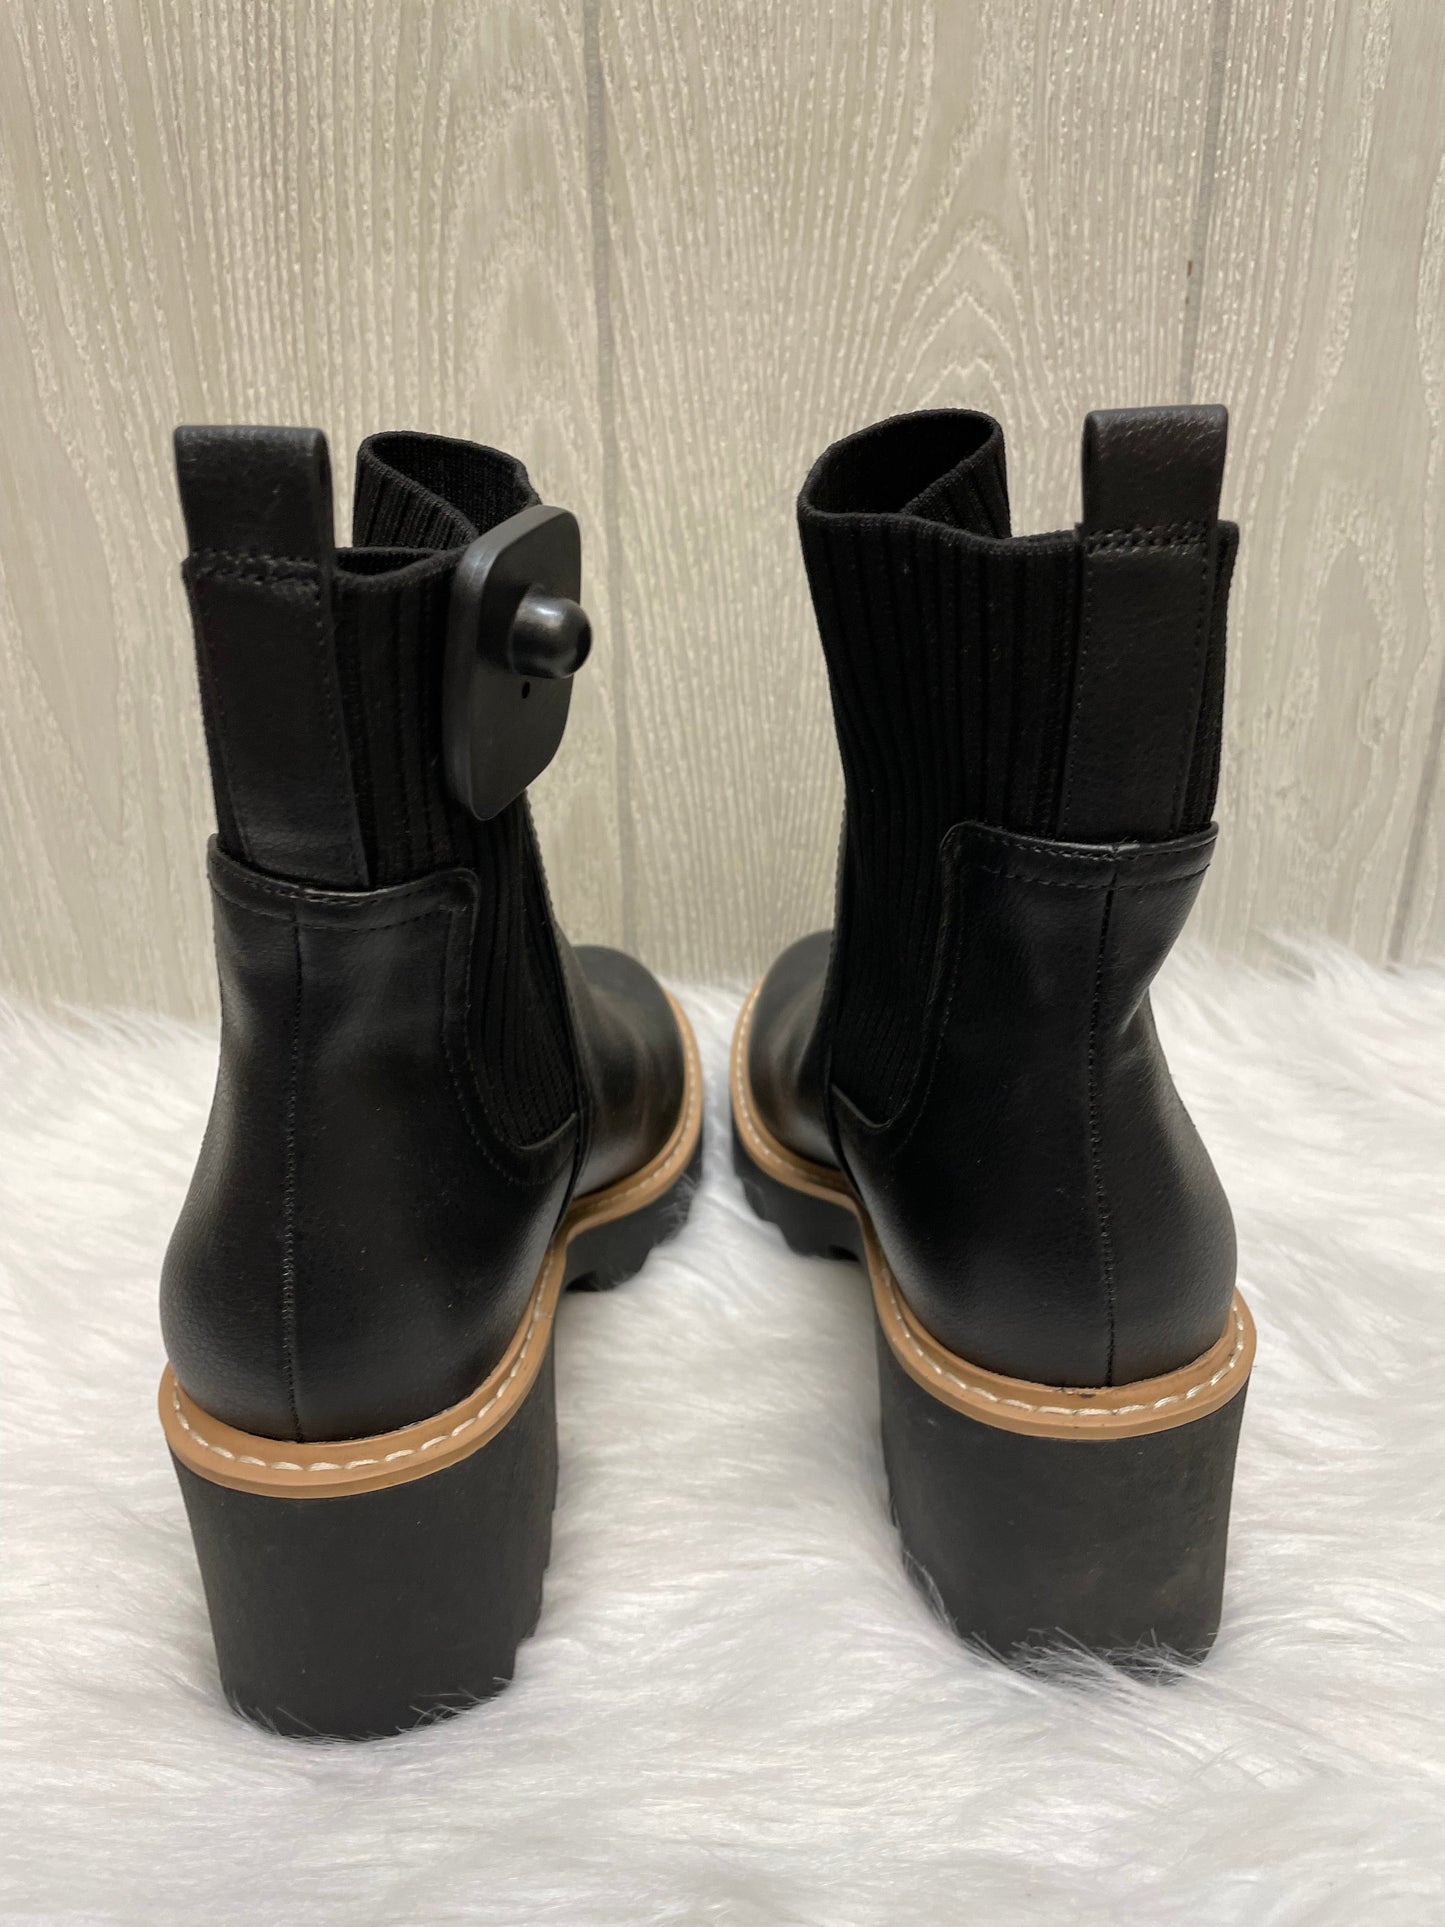 Black Boots Ankle Heels Dolce Vita, Size 7.5